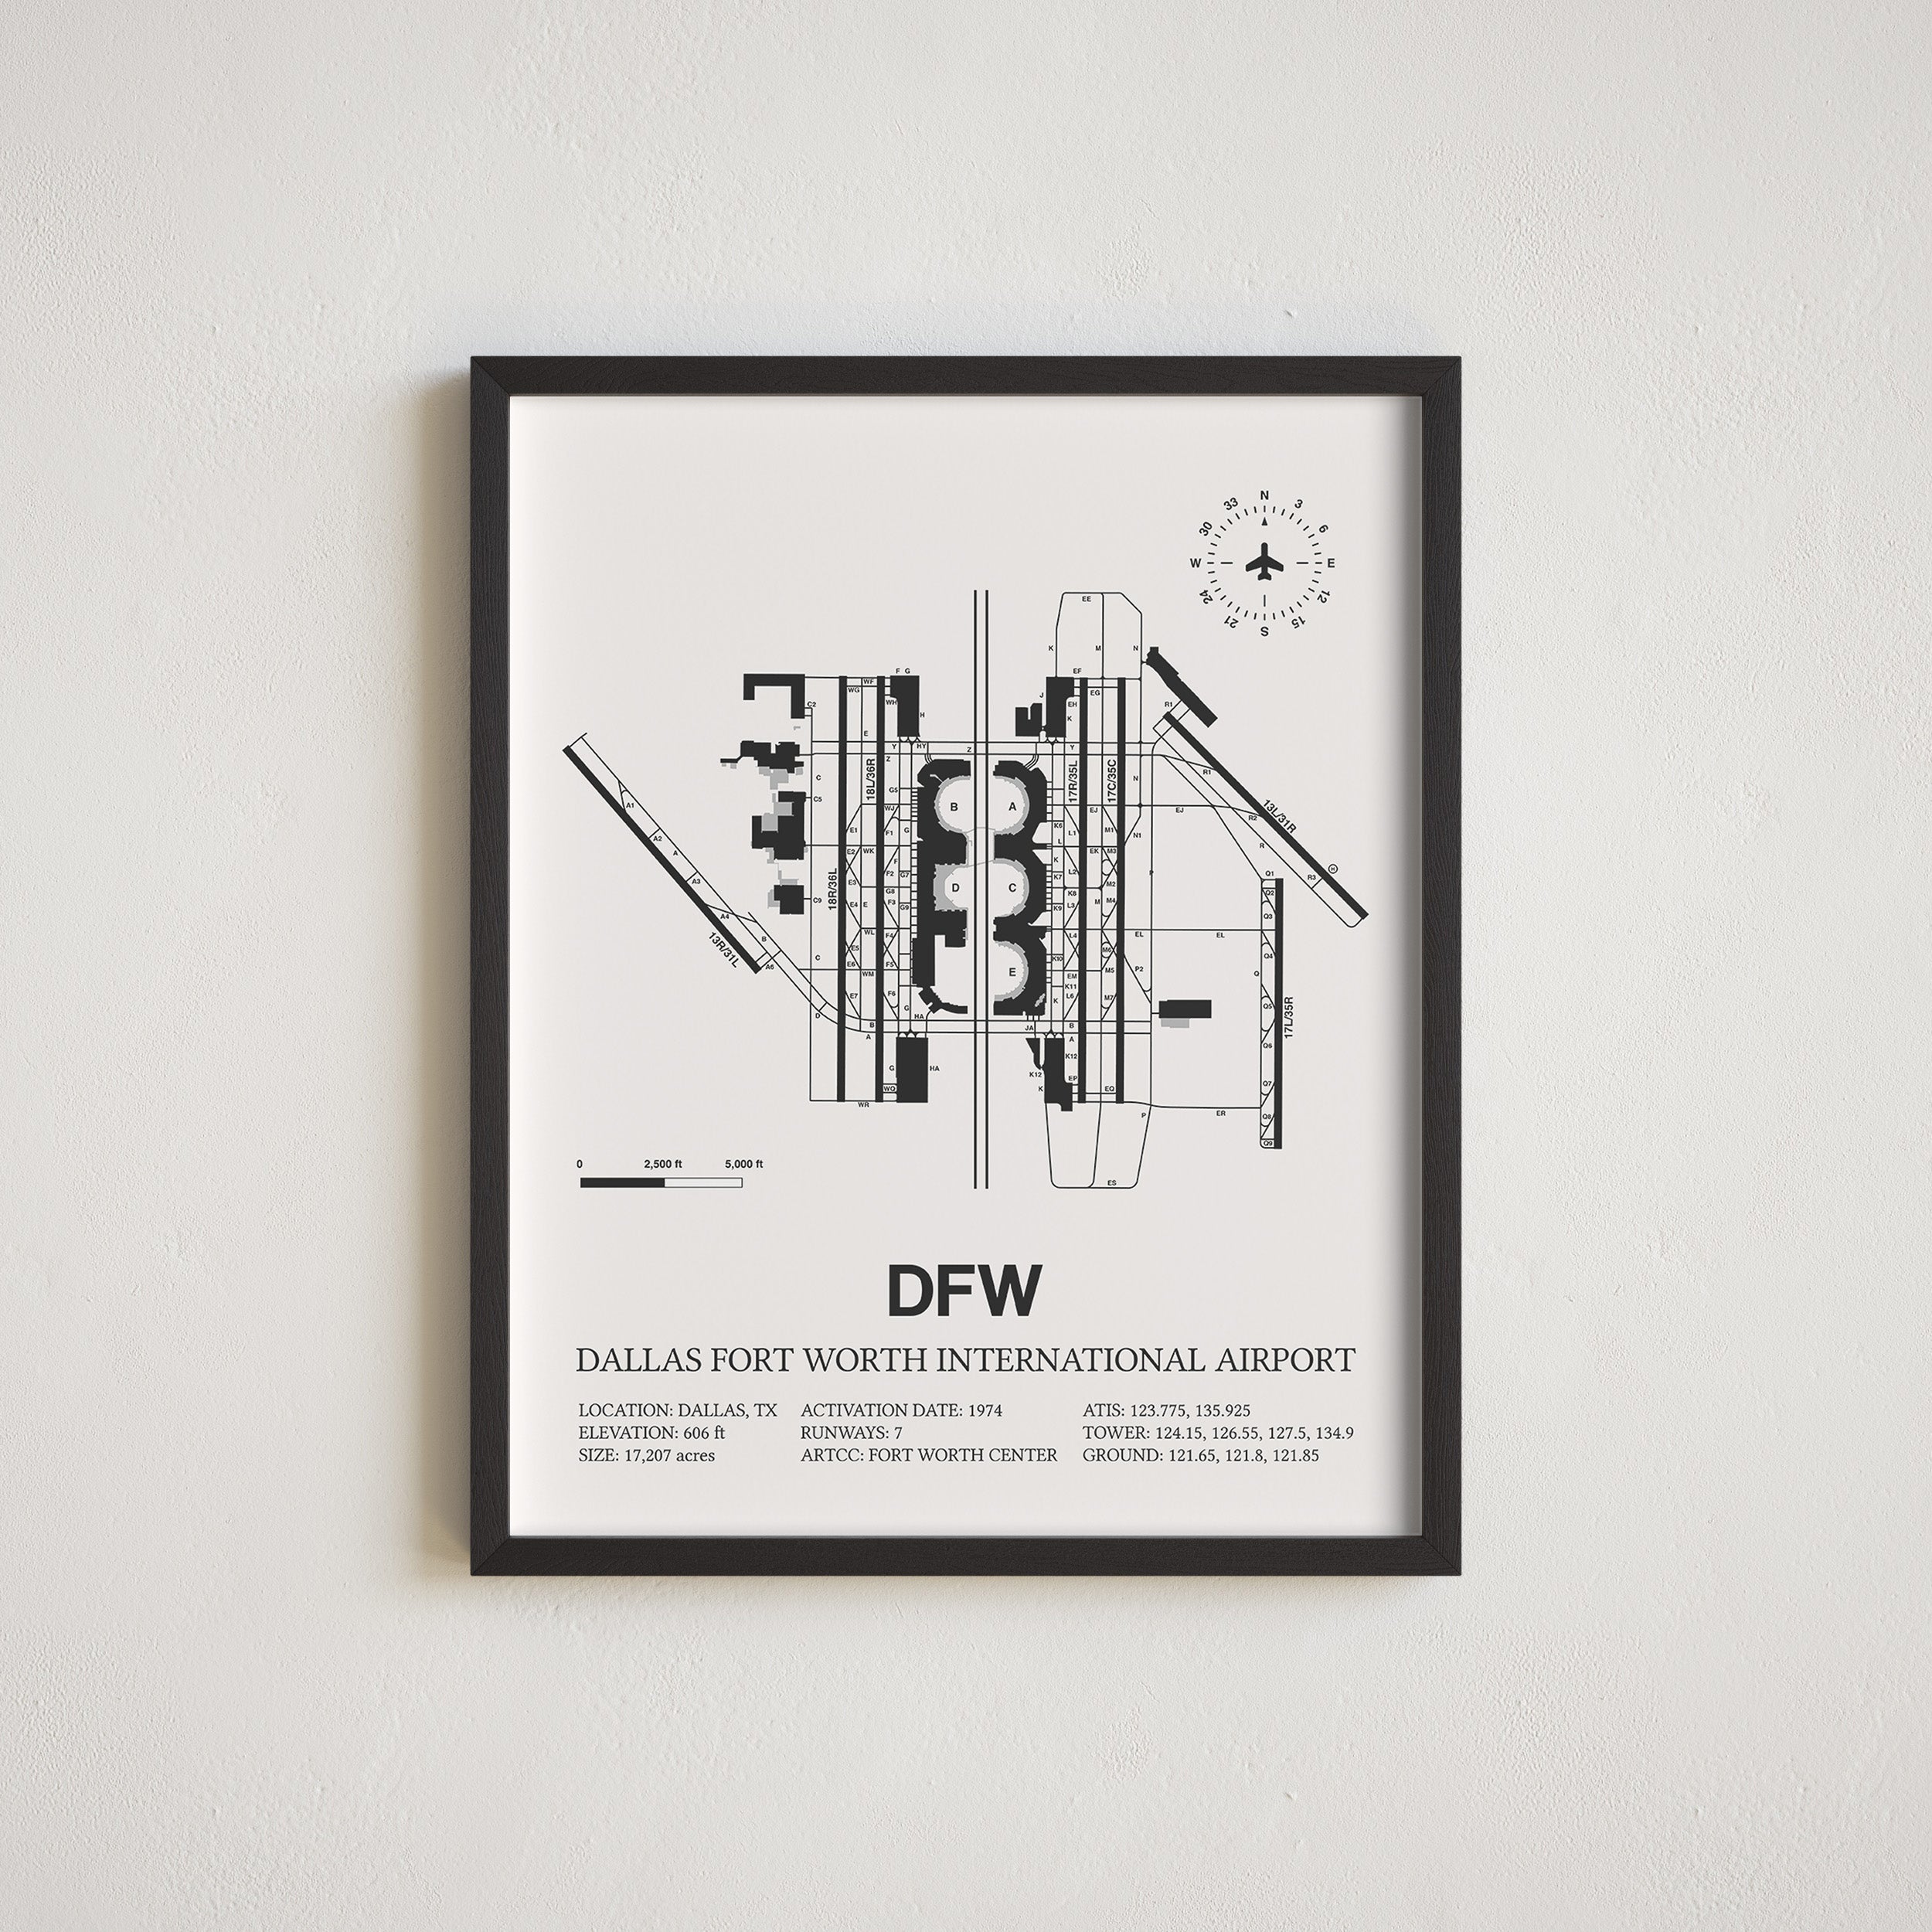 DFW Framed Airport Map